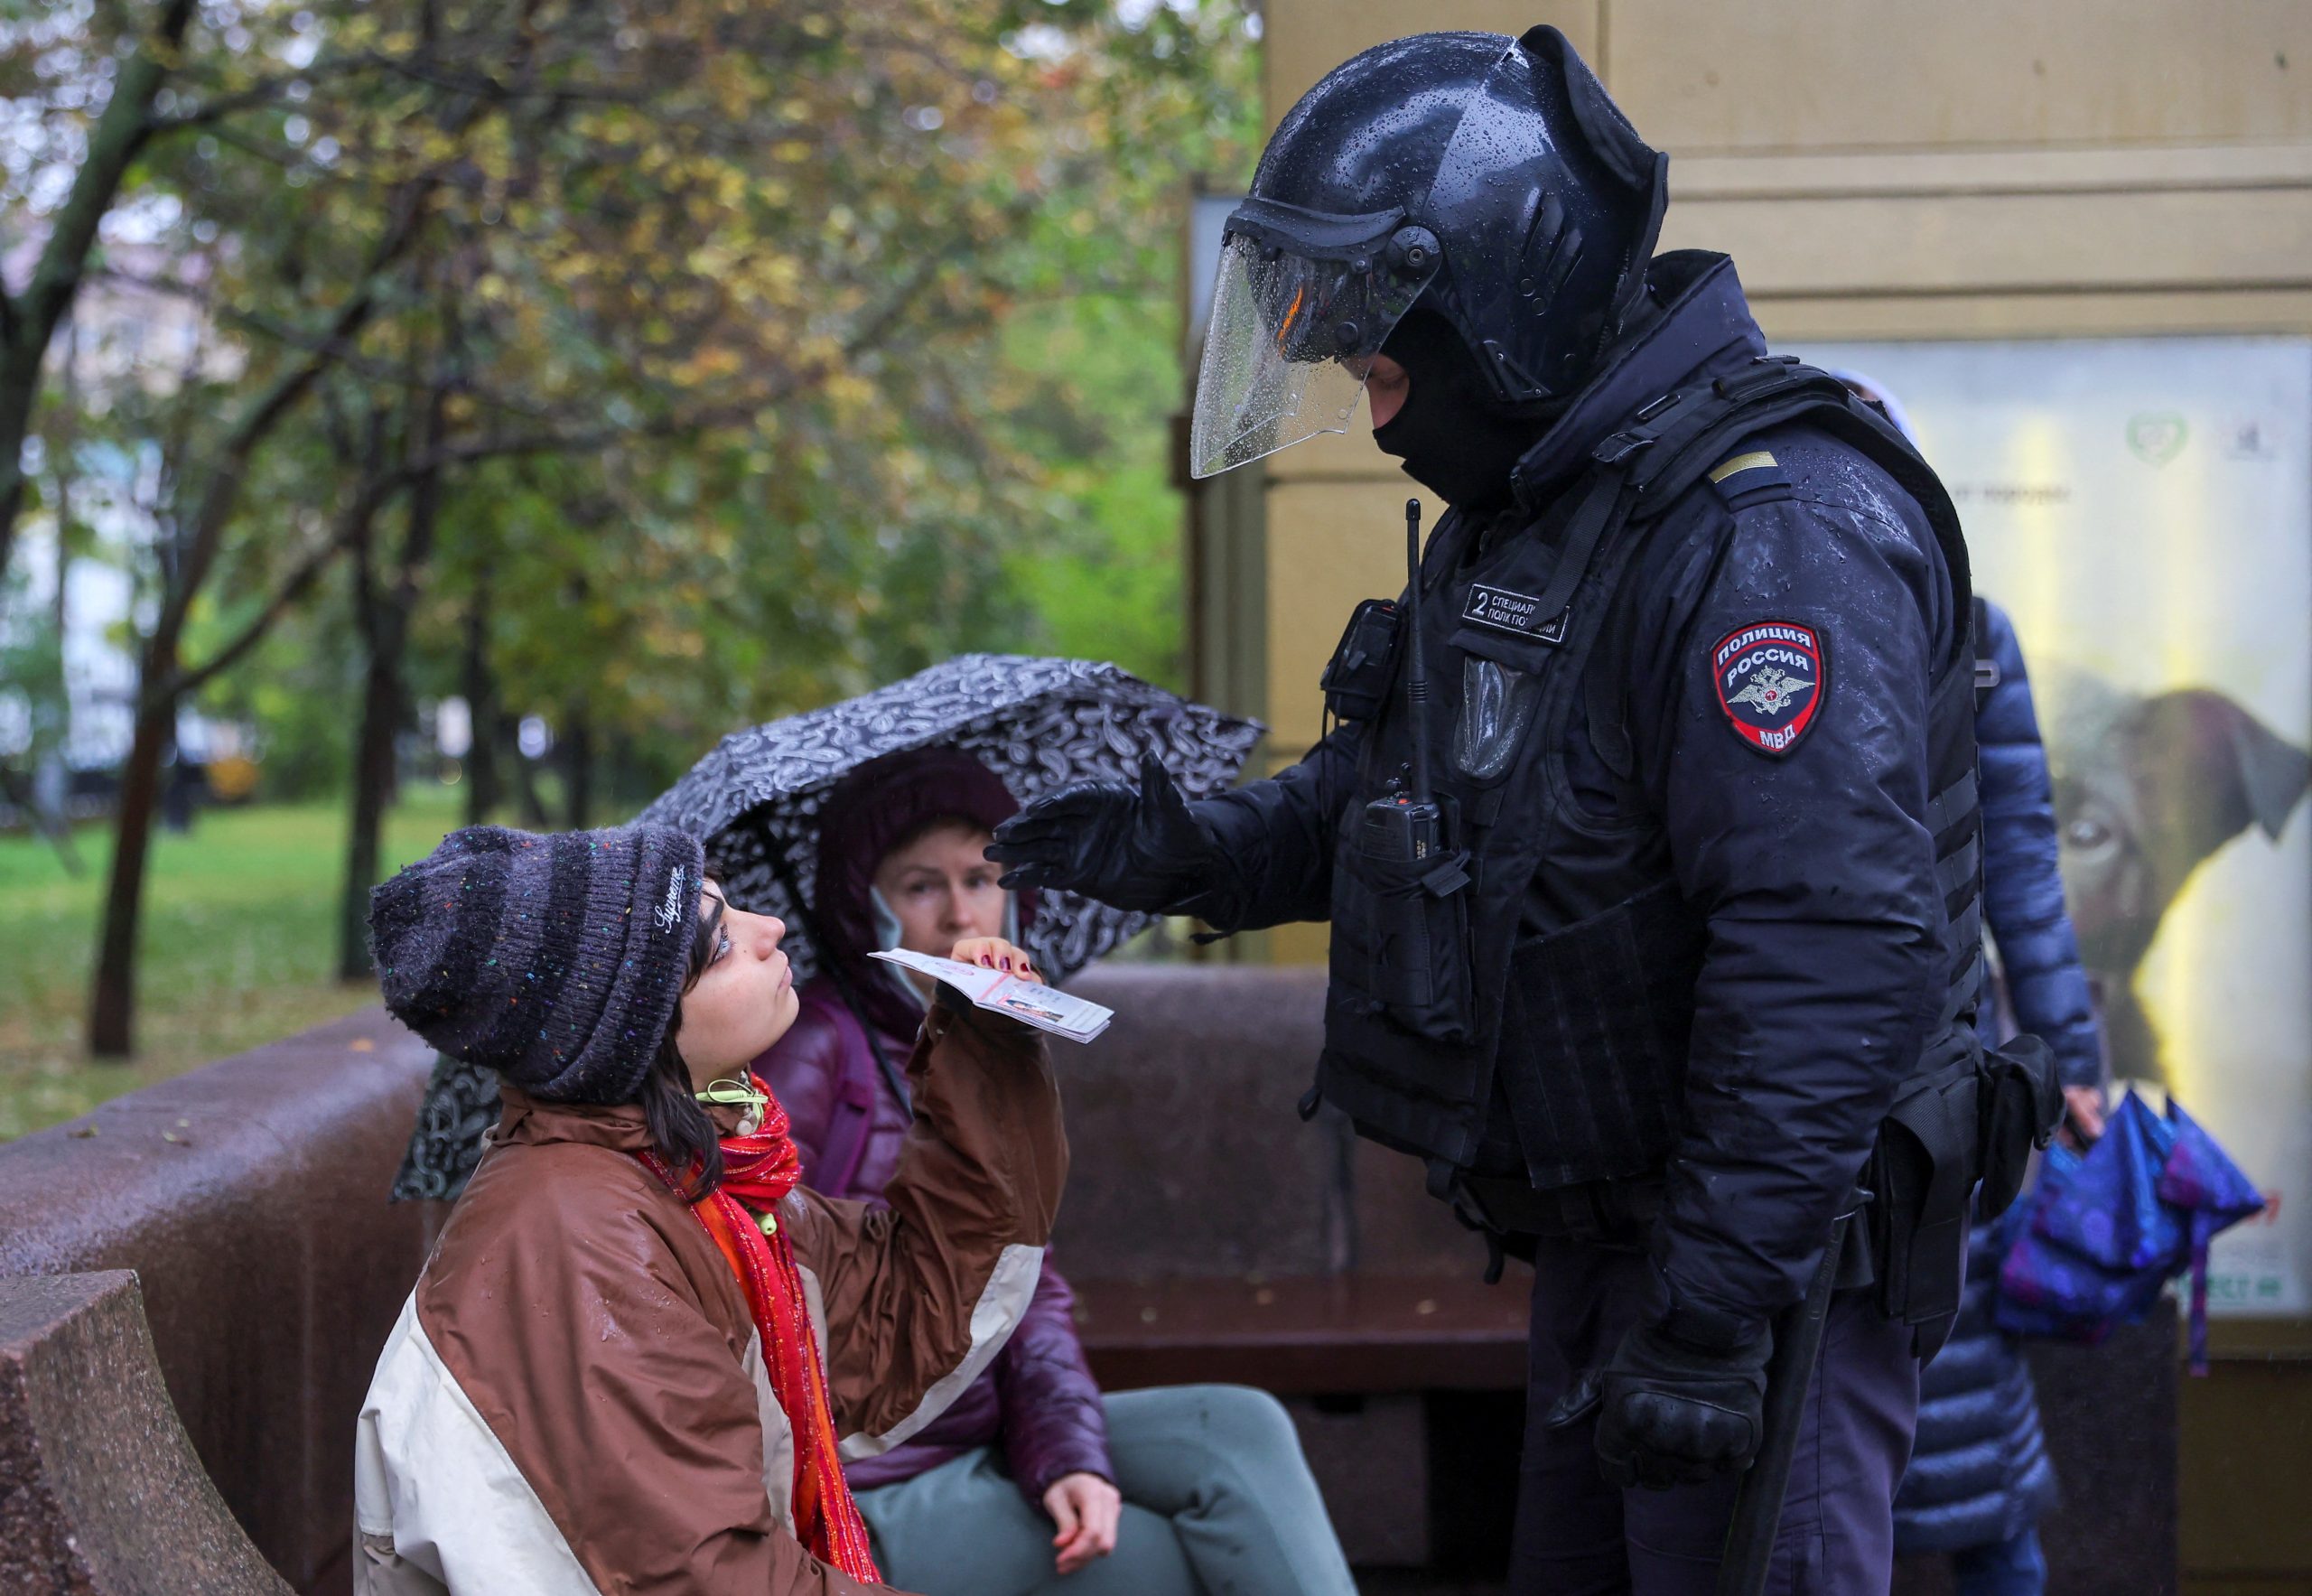 Photo: A person shows a passport to a Russian law enforcement officer during a rally, after opposition activists called for street protests against the mobilisation of reservists ordered by President Vladimir Putin, in Moscow, Russia September 24, 2022. Credit: REUTERS/REUTERS PHOTOGRAPHER